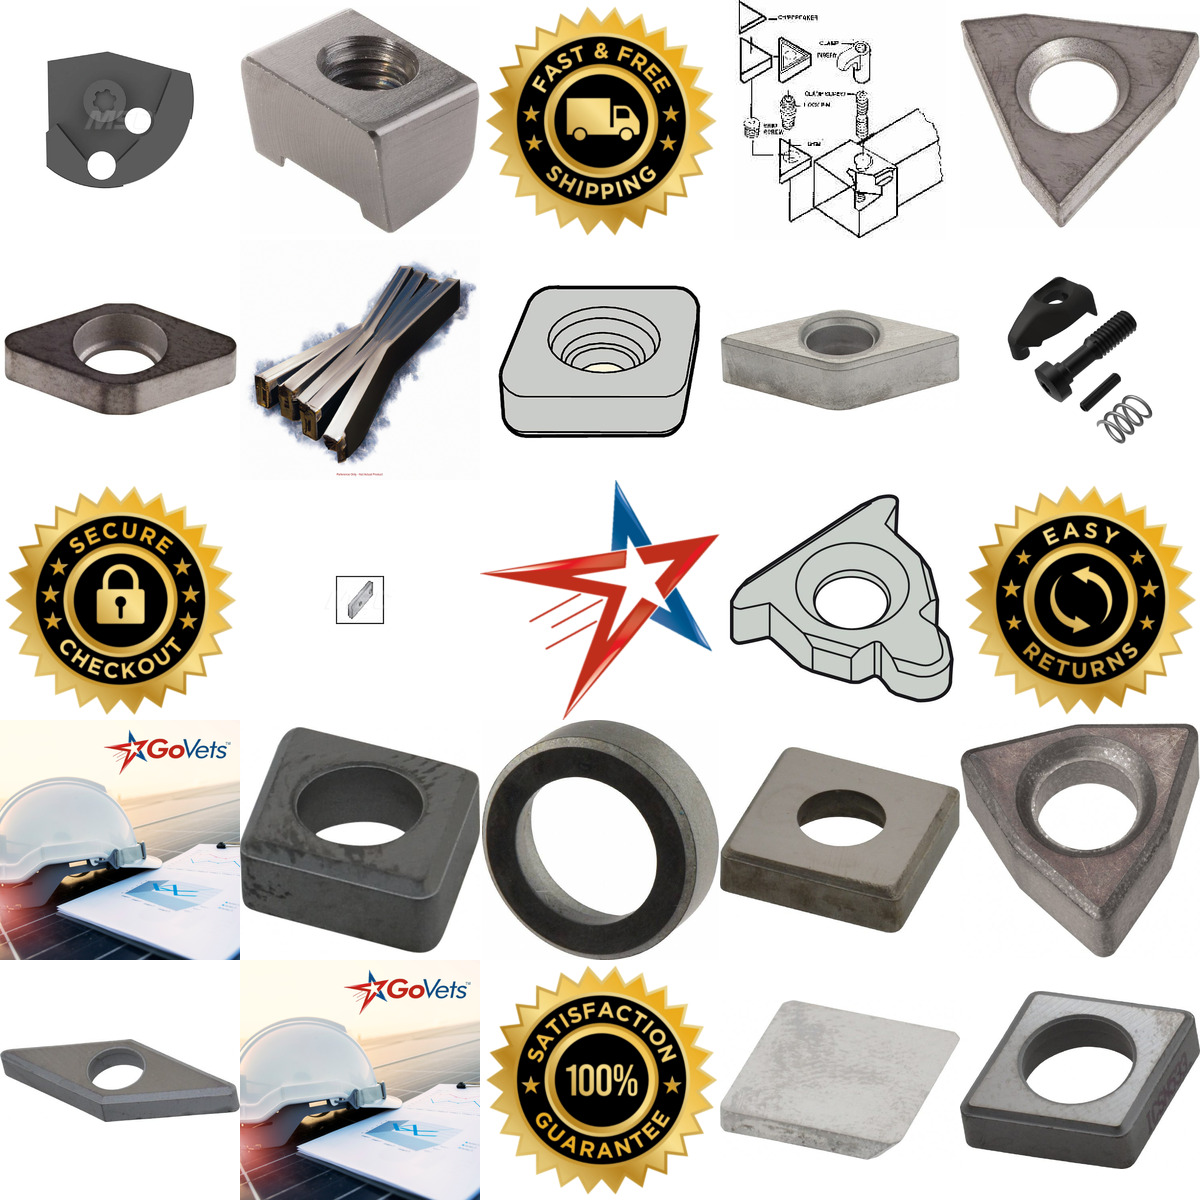 A selection of Insert and Holder Hardware products on GoVets